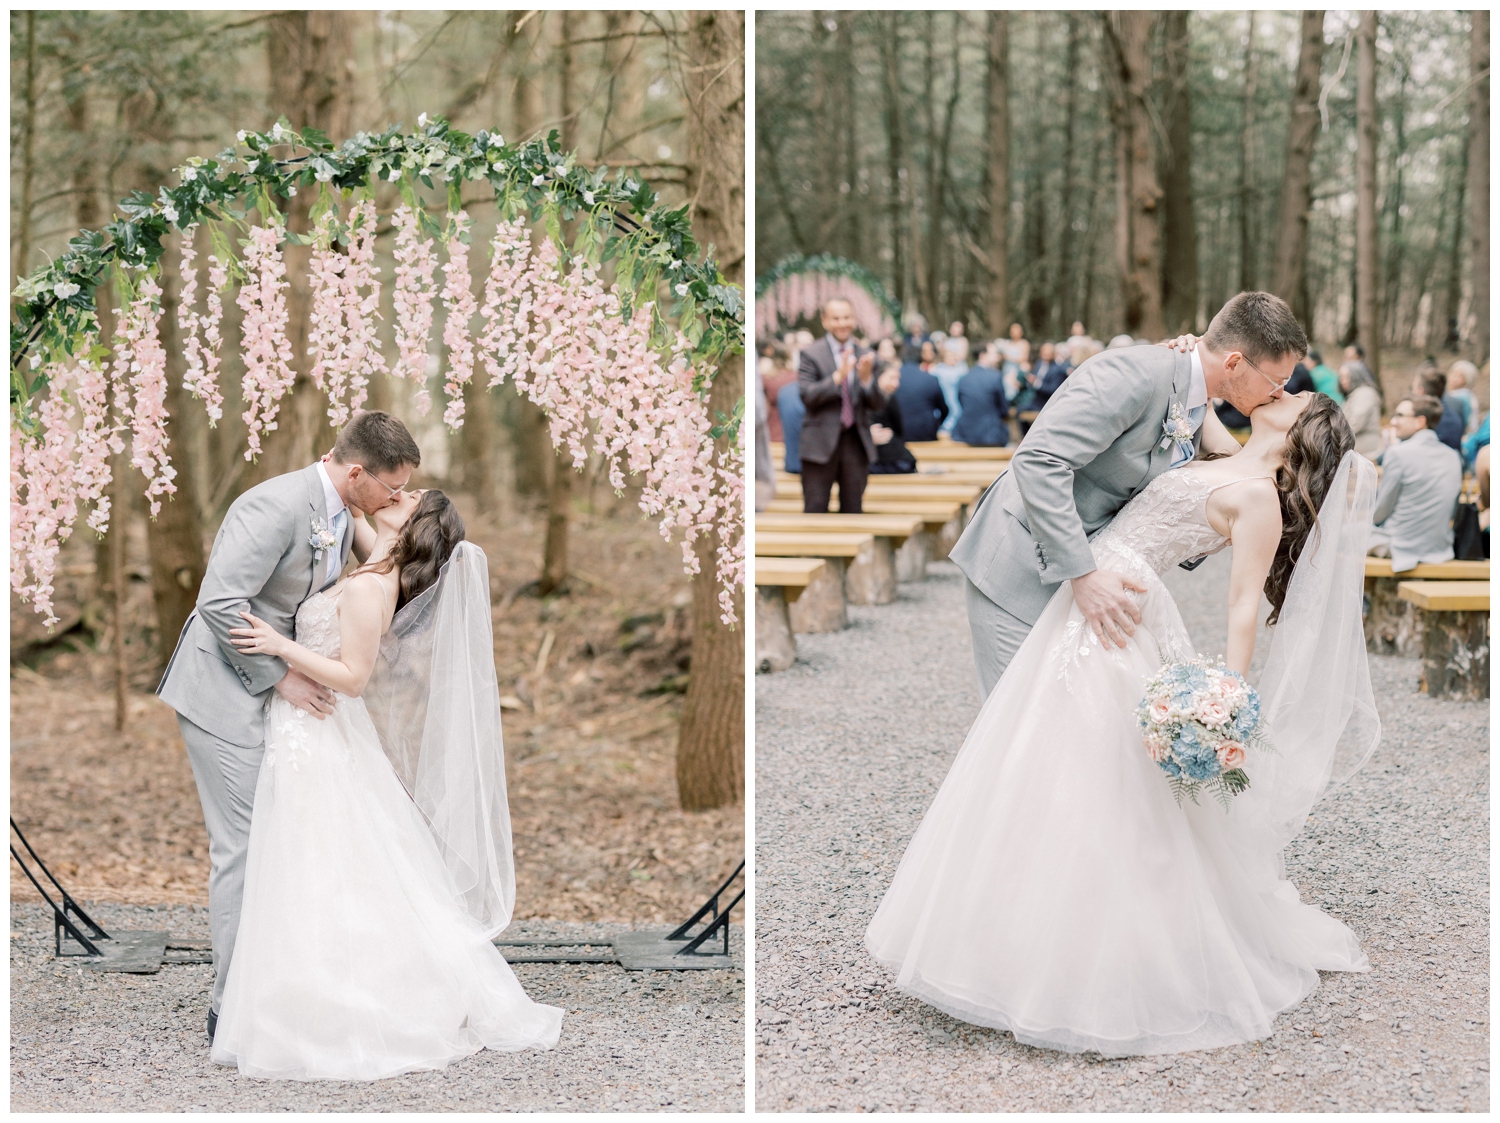 A couple on their wedding day sharing their first kiss as husband and wife in their wooded ceremony at Windham Manor.